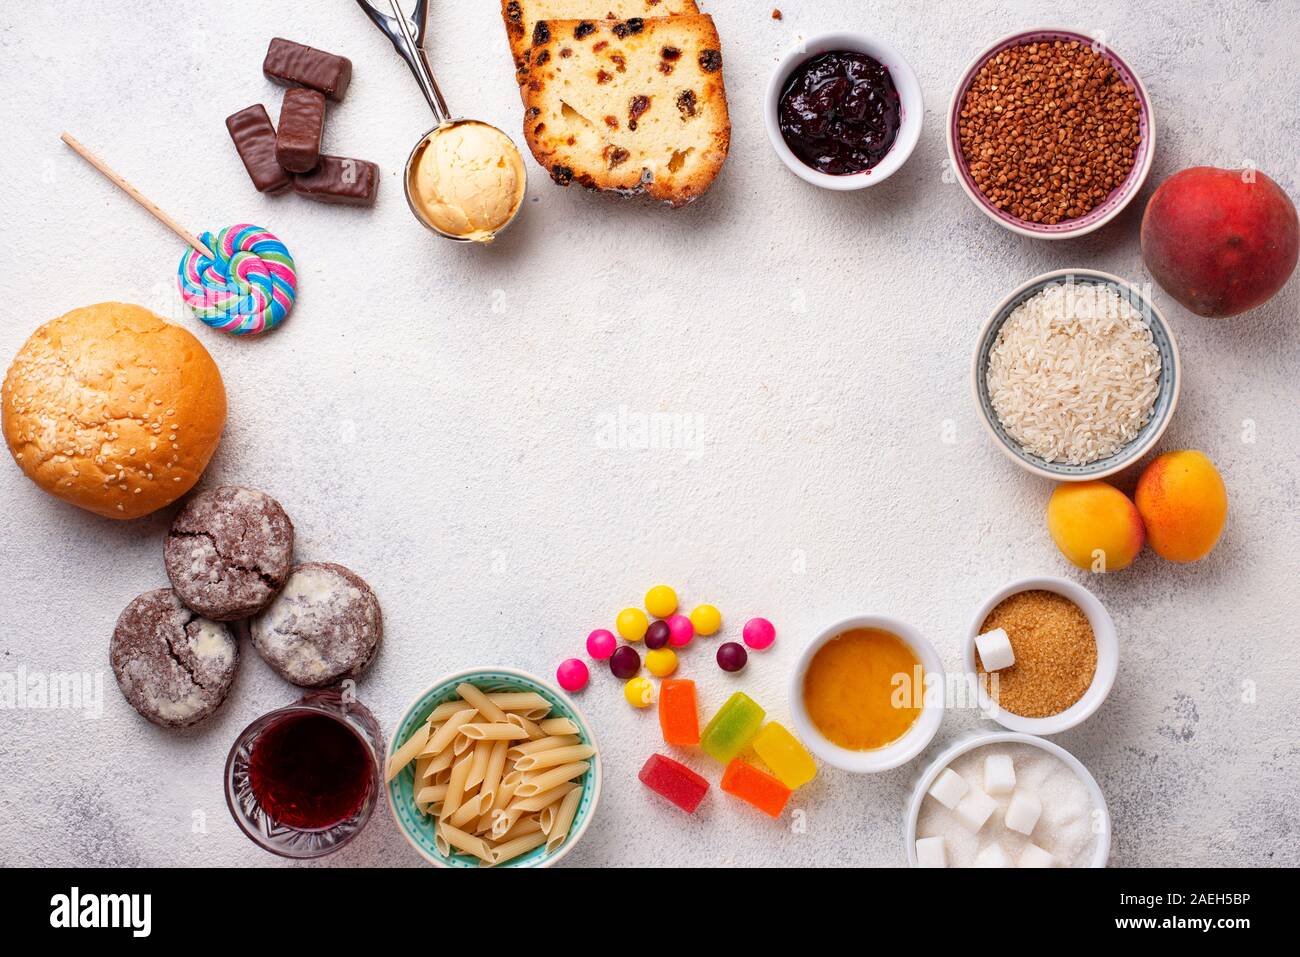 Assortment of simple carbohydrates food Stock Photo